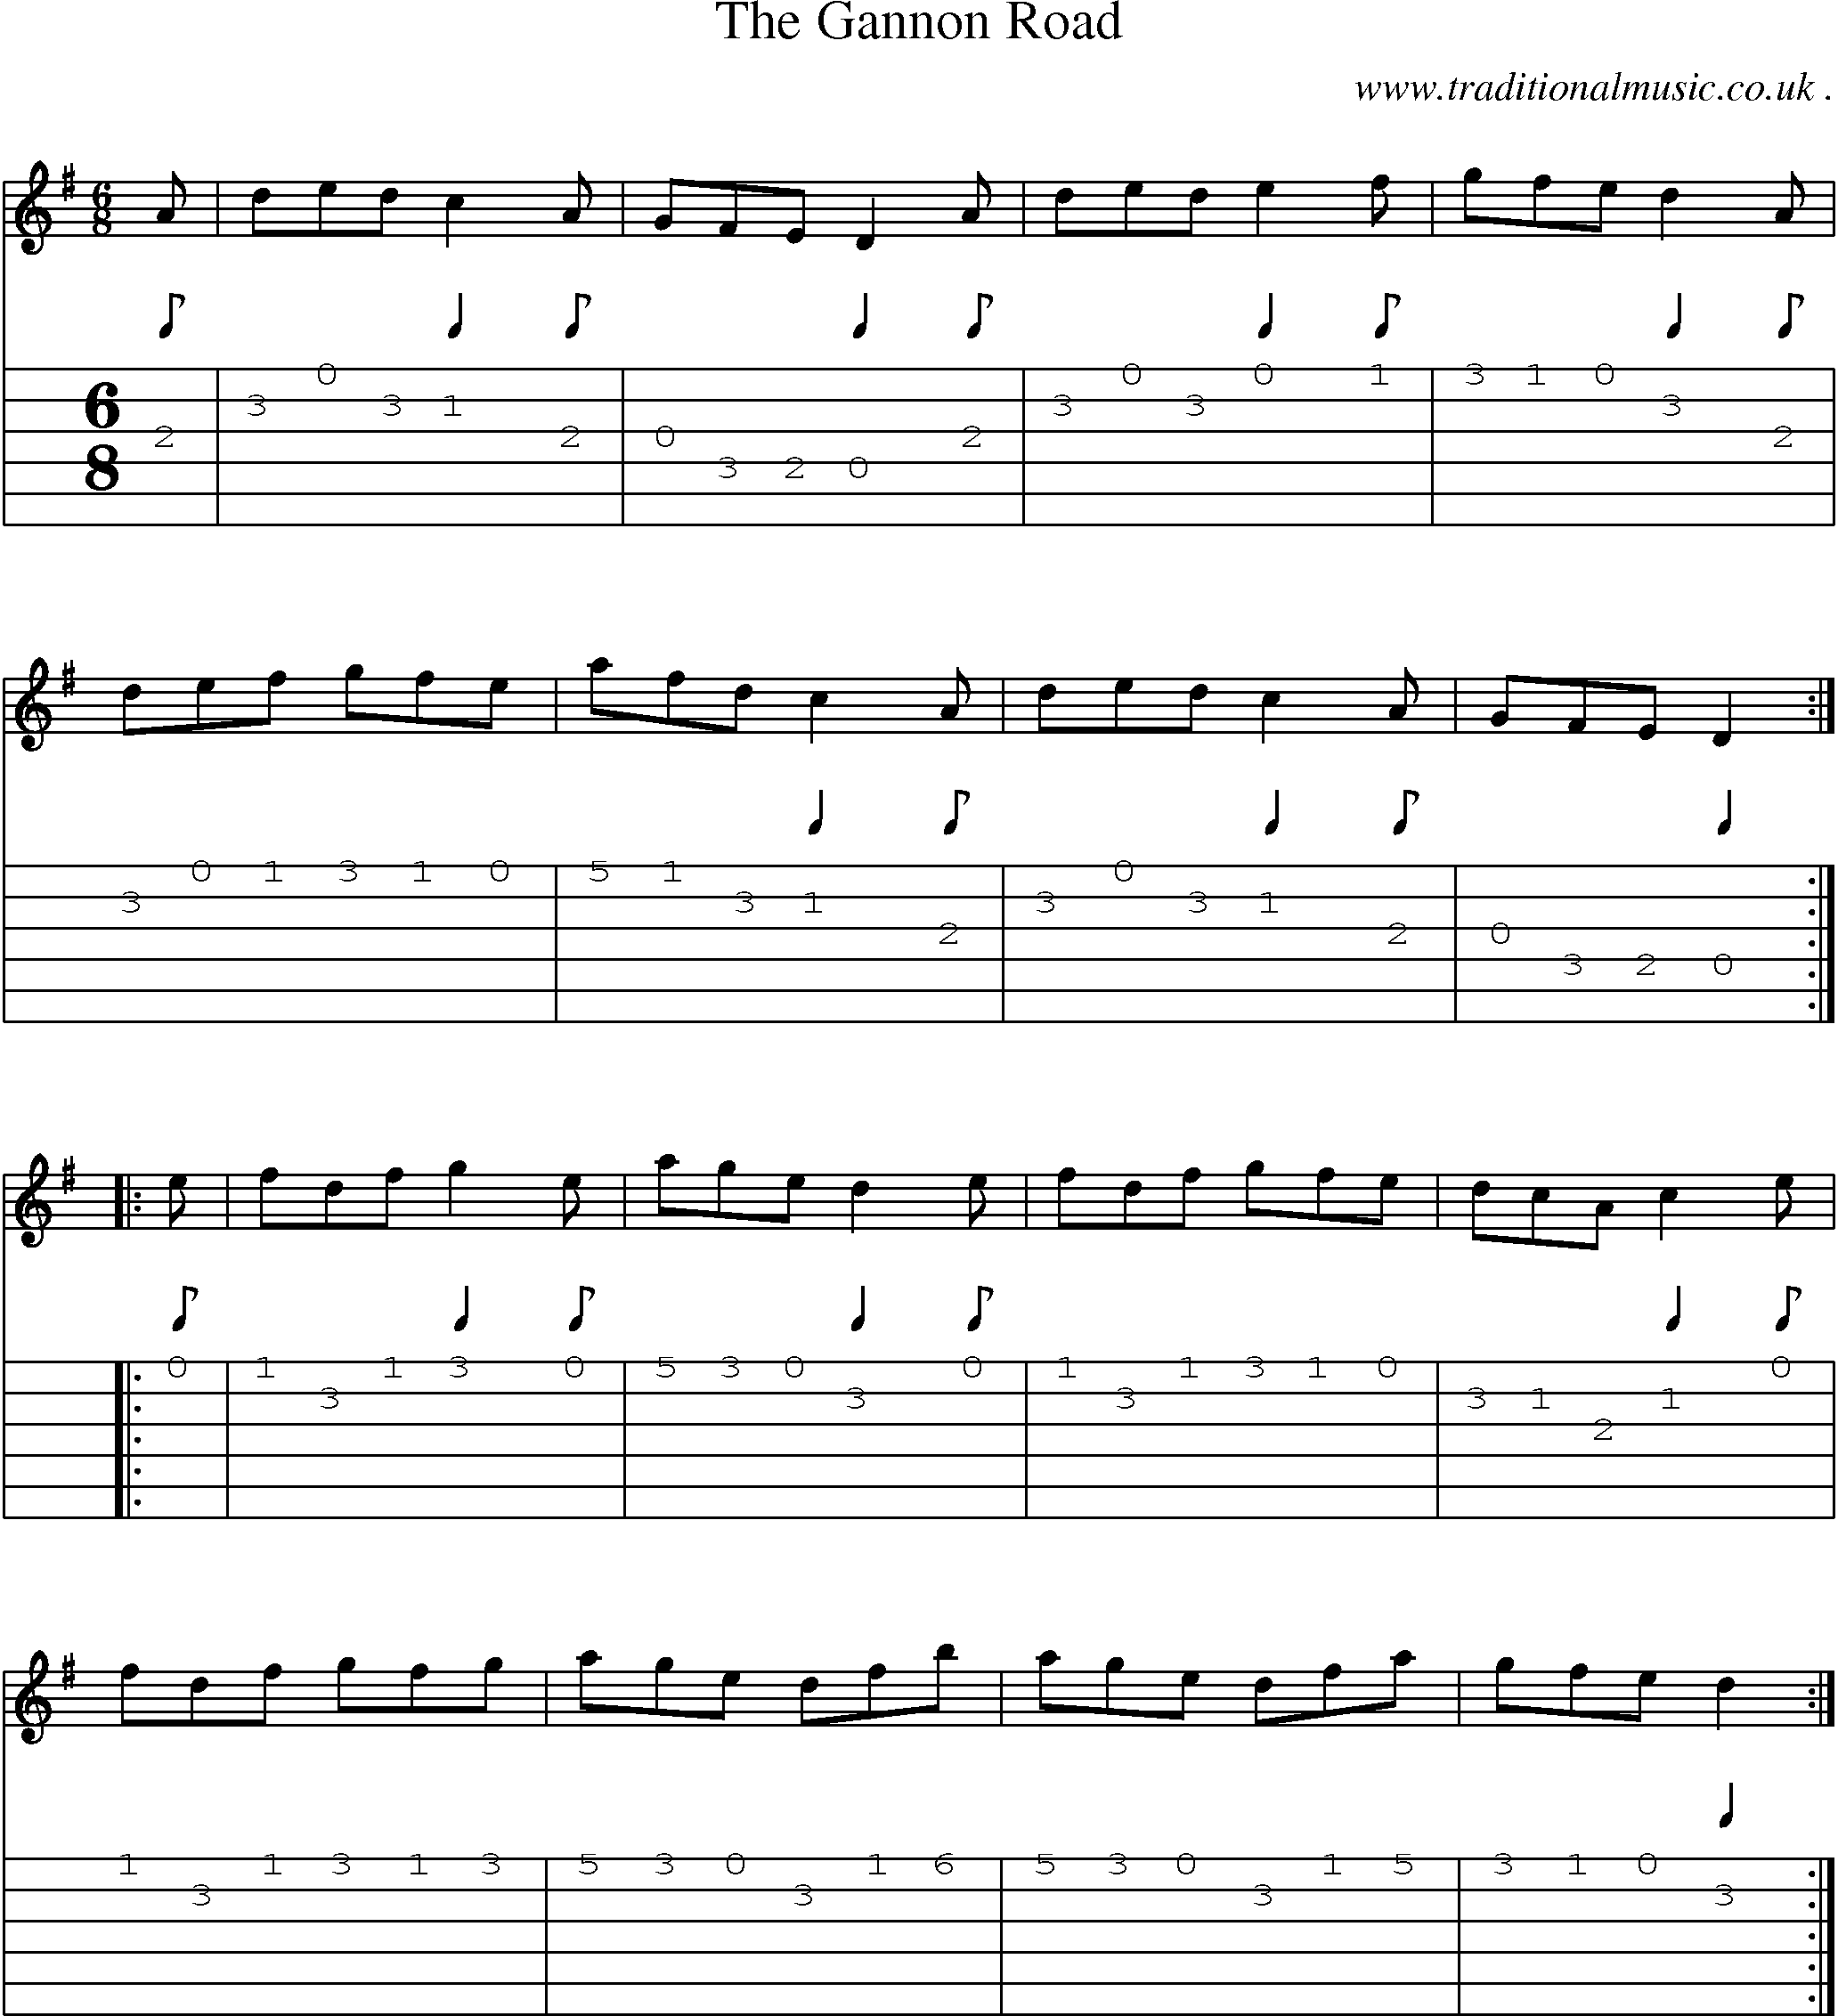 Sheet-Music and Guitar Tabs for The Gannon Road